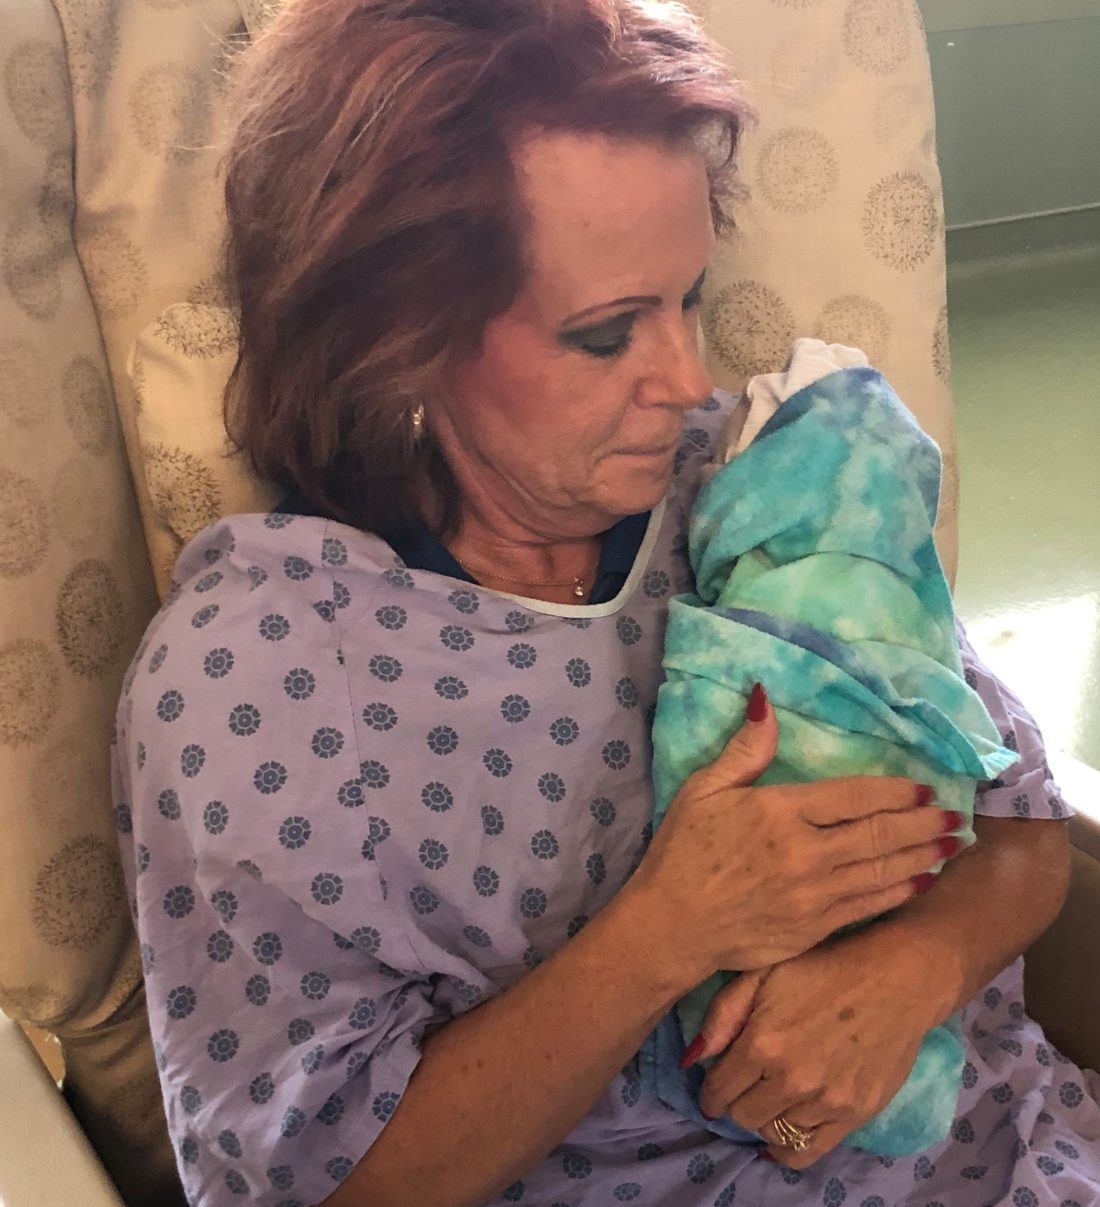 Woman wearing hospital gown and holding swaddled baby